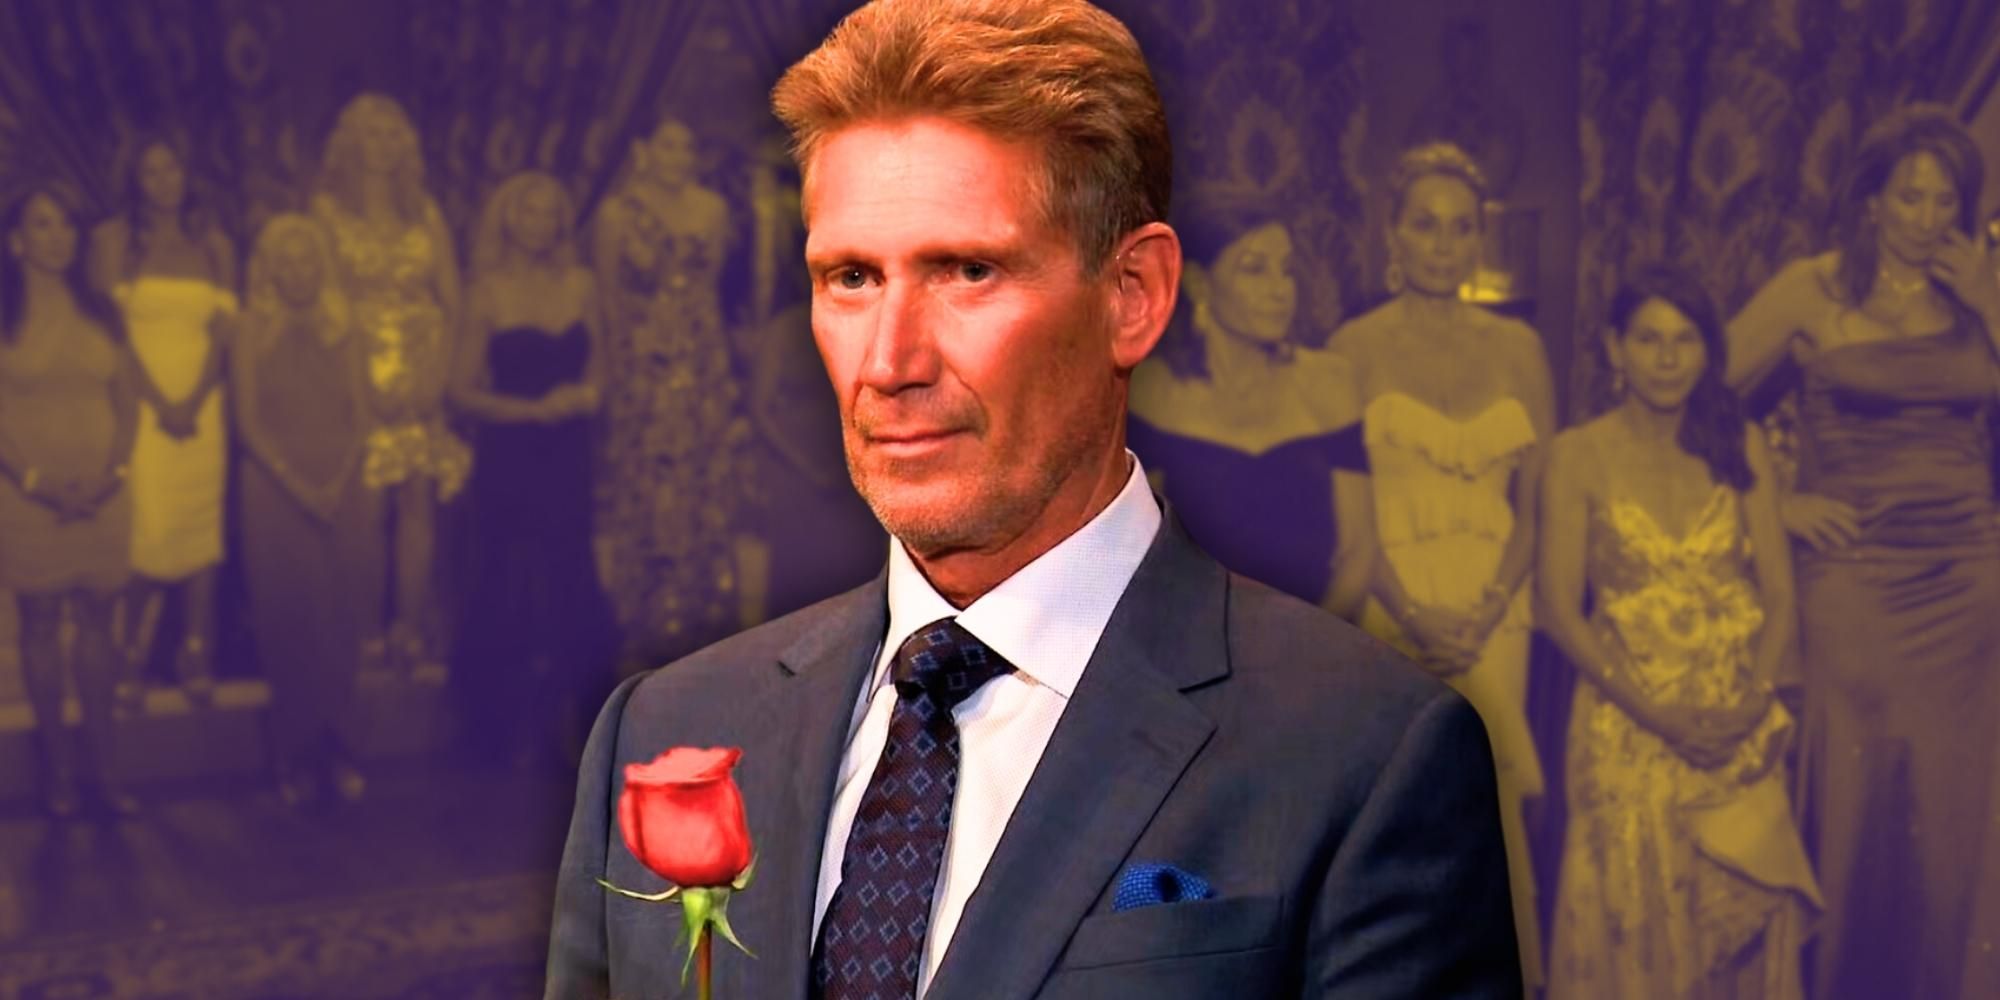 The Golden Bachelor season 1 star Gerry Turner holding a rose, with the female contestants behind him